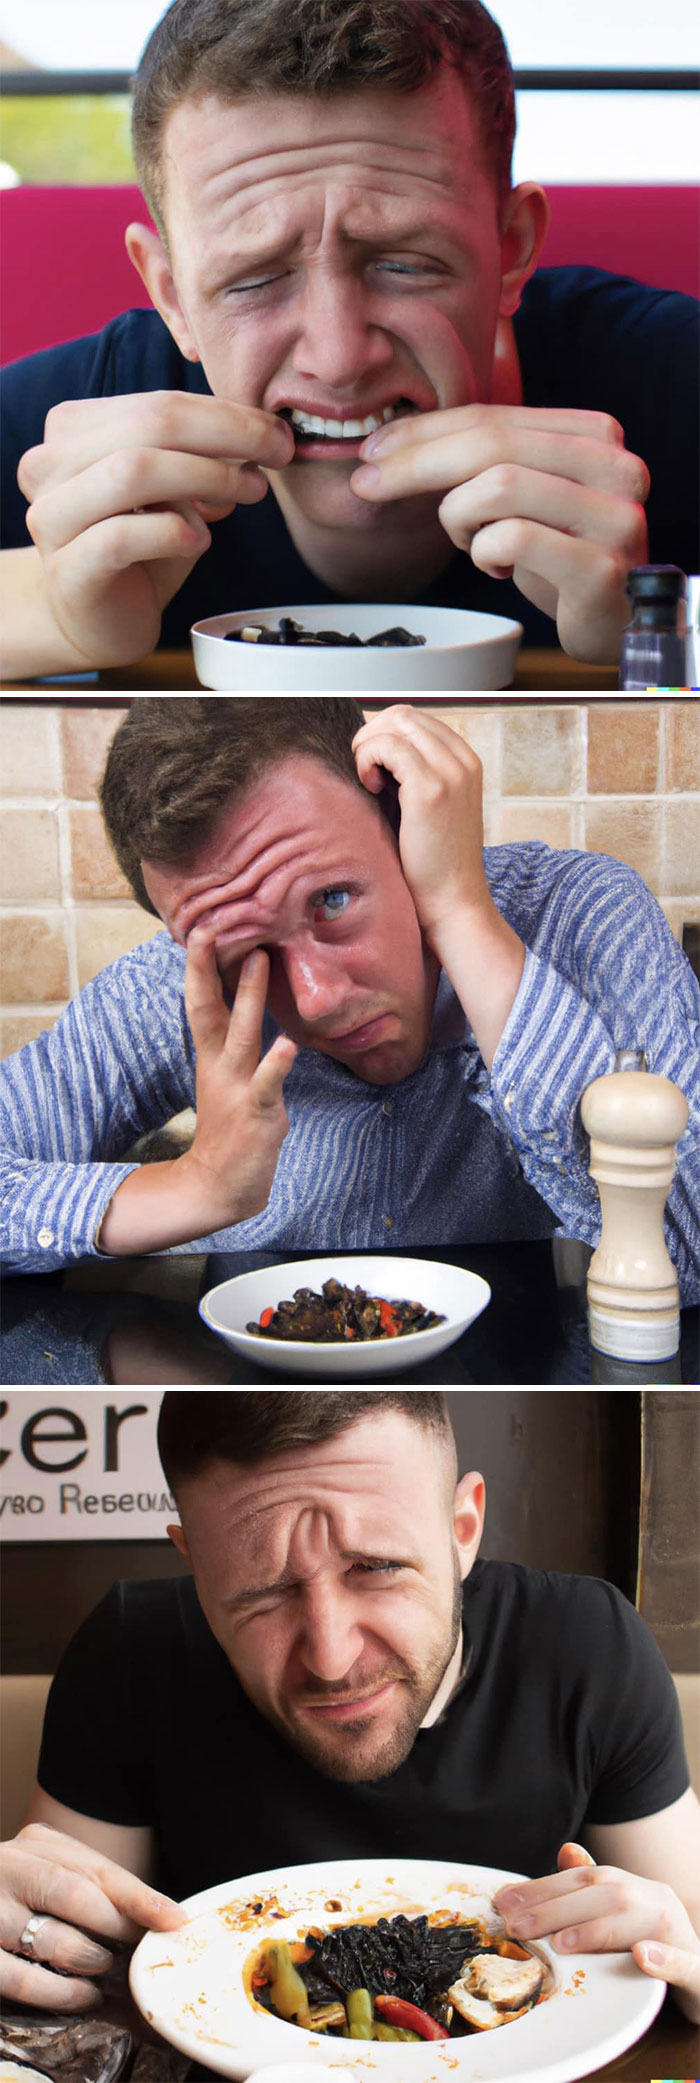 “Photo Of British Person Crying Because His Food Is Too Spicy Because It Has Black Pepper”